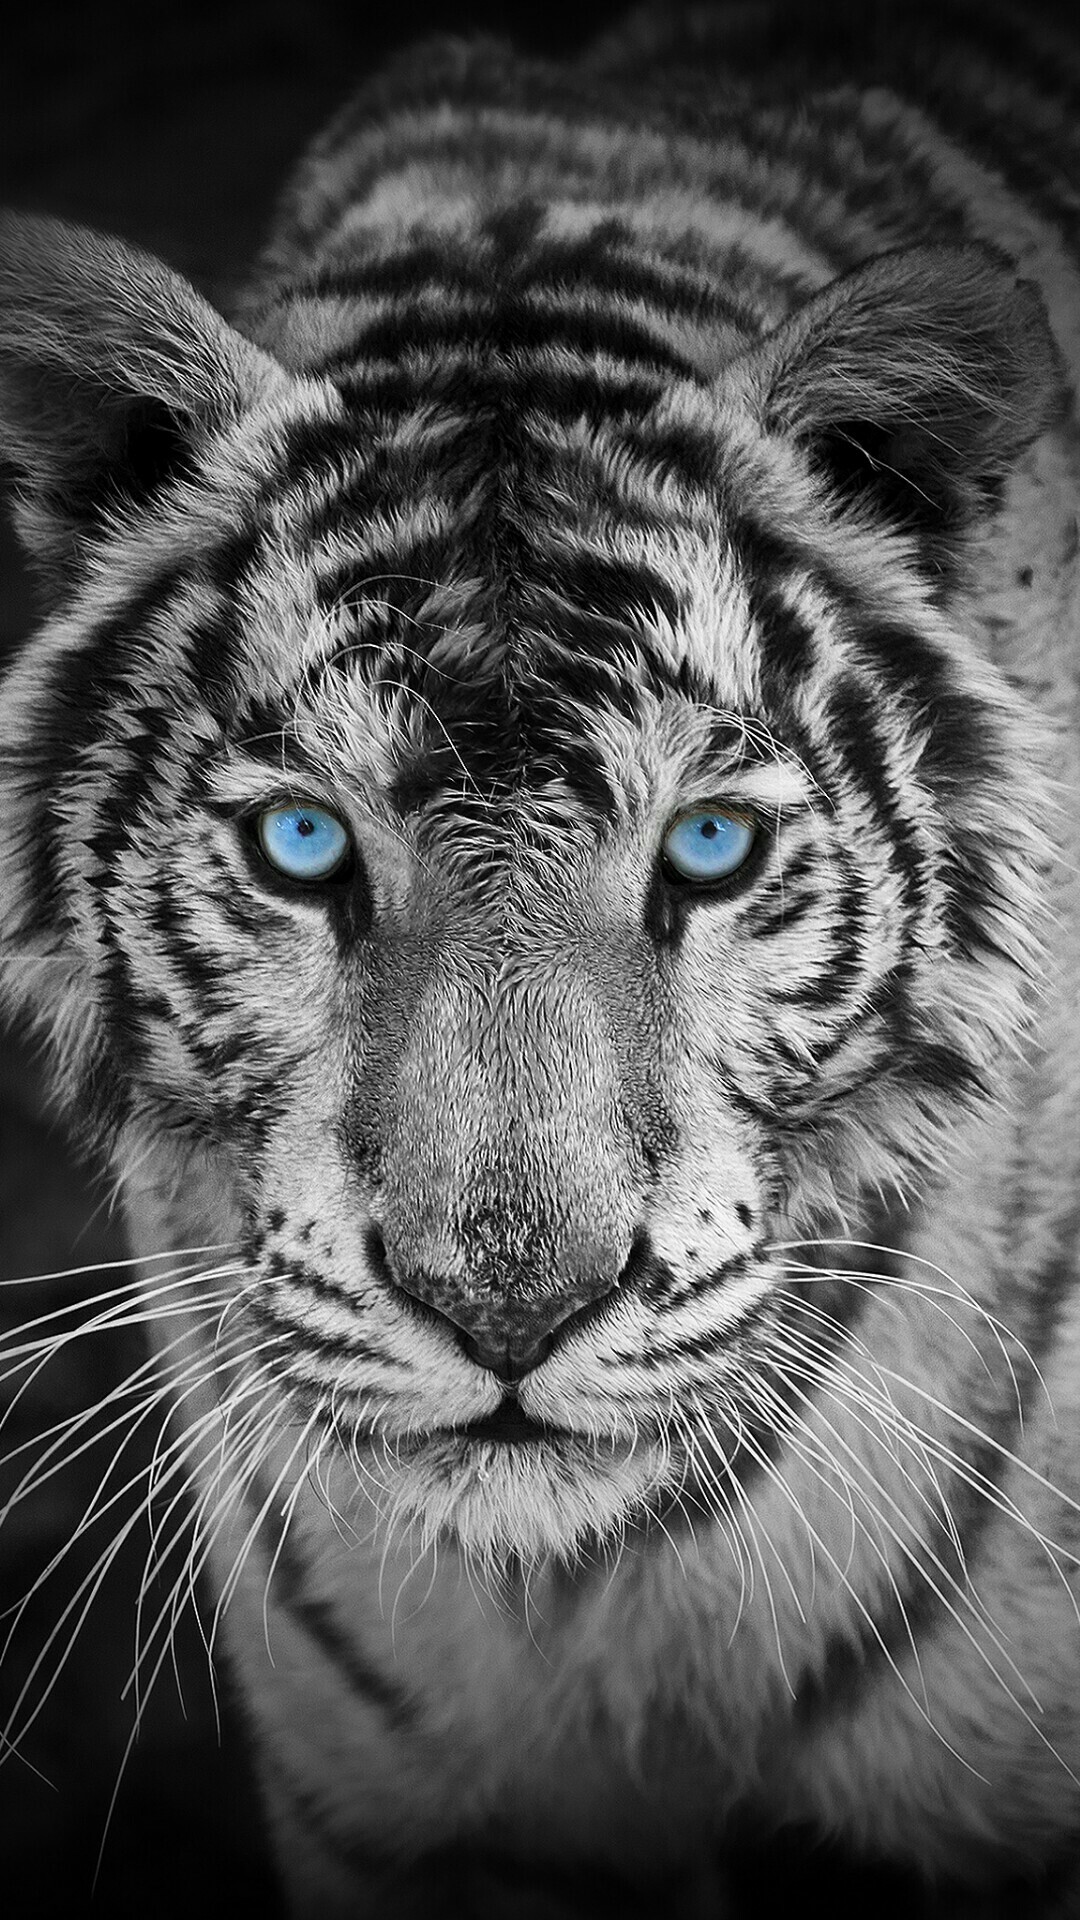 Tiger Wallpaper Hd Download For Mobile Newbets